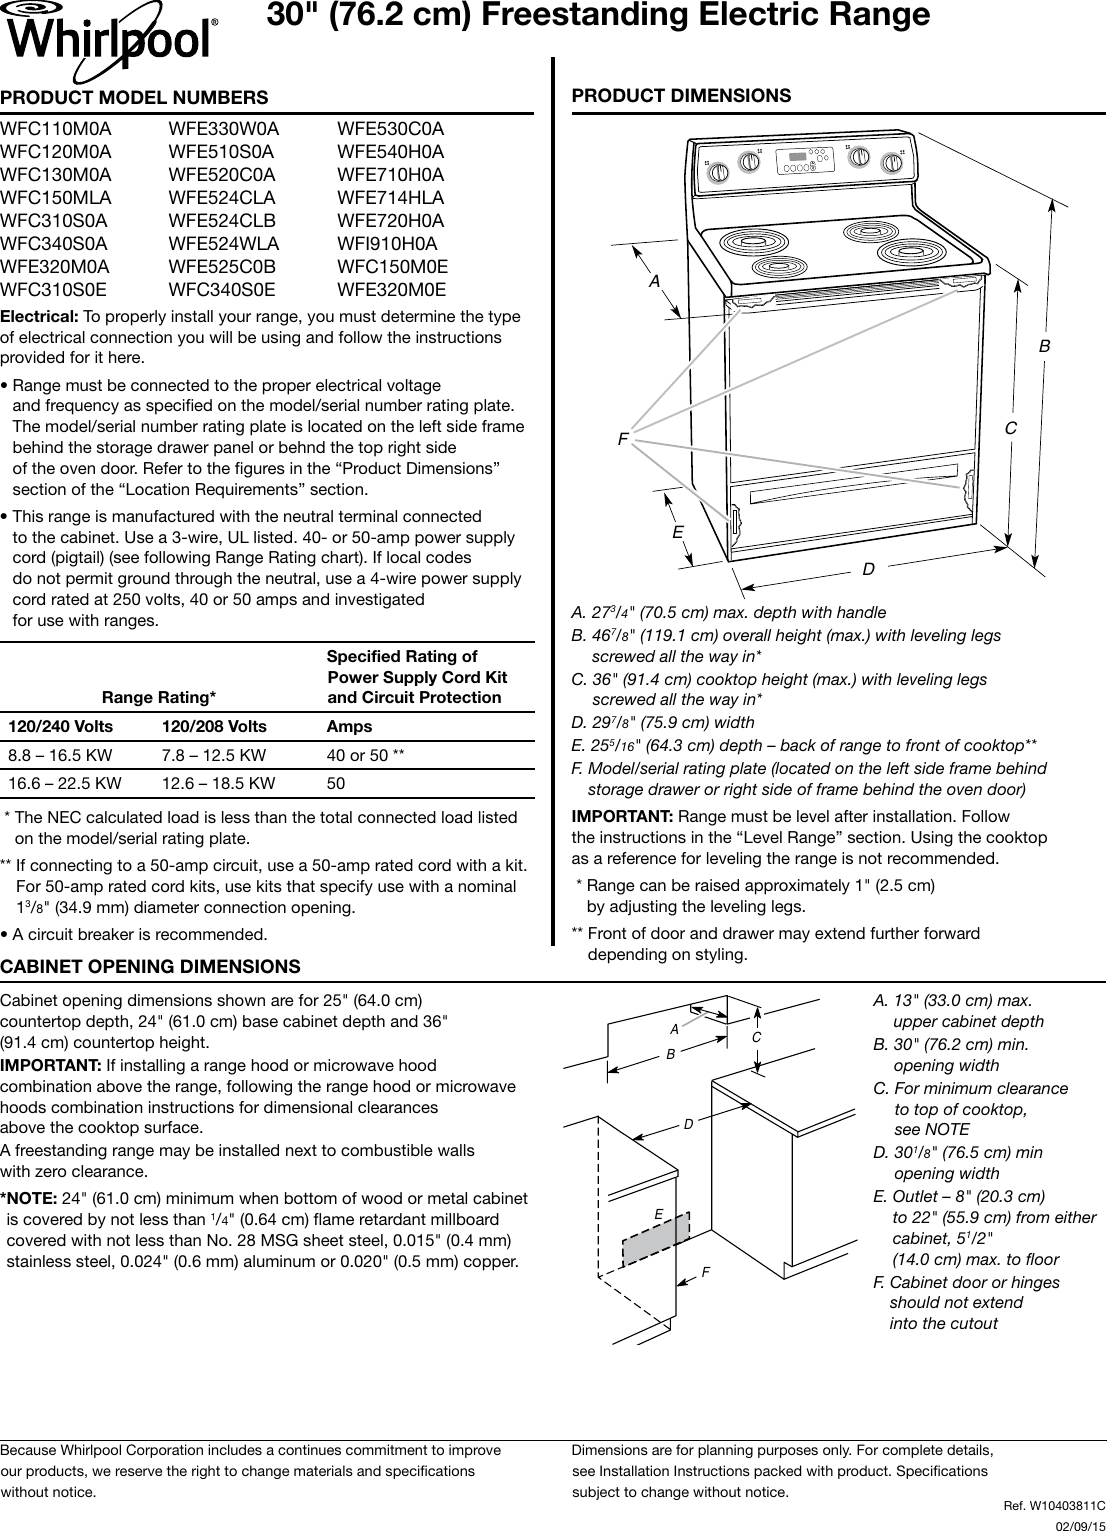 Page 1 of 1 - Whirlpool Whirlpool-Wfe714Hlas-Dimension-Guide-  Whirlpool-wfe714hlas-dimension-guide